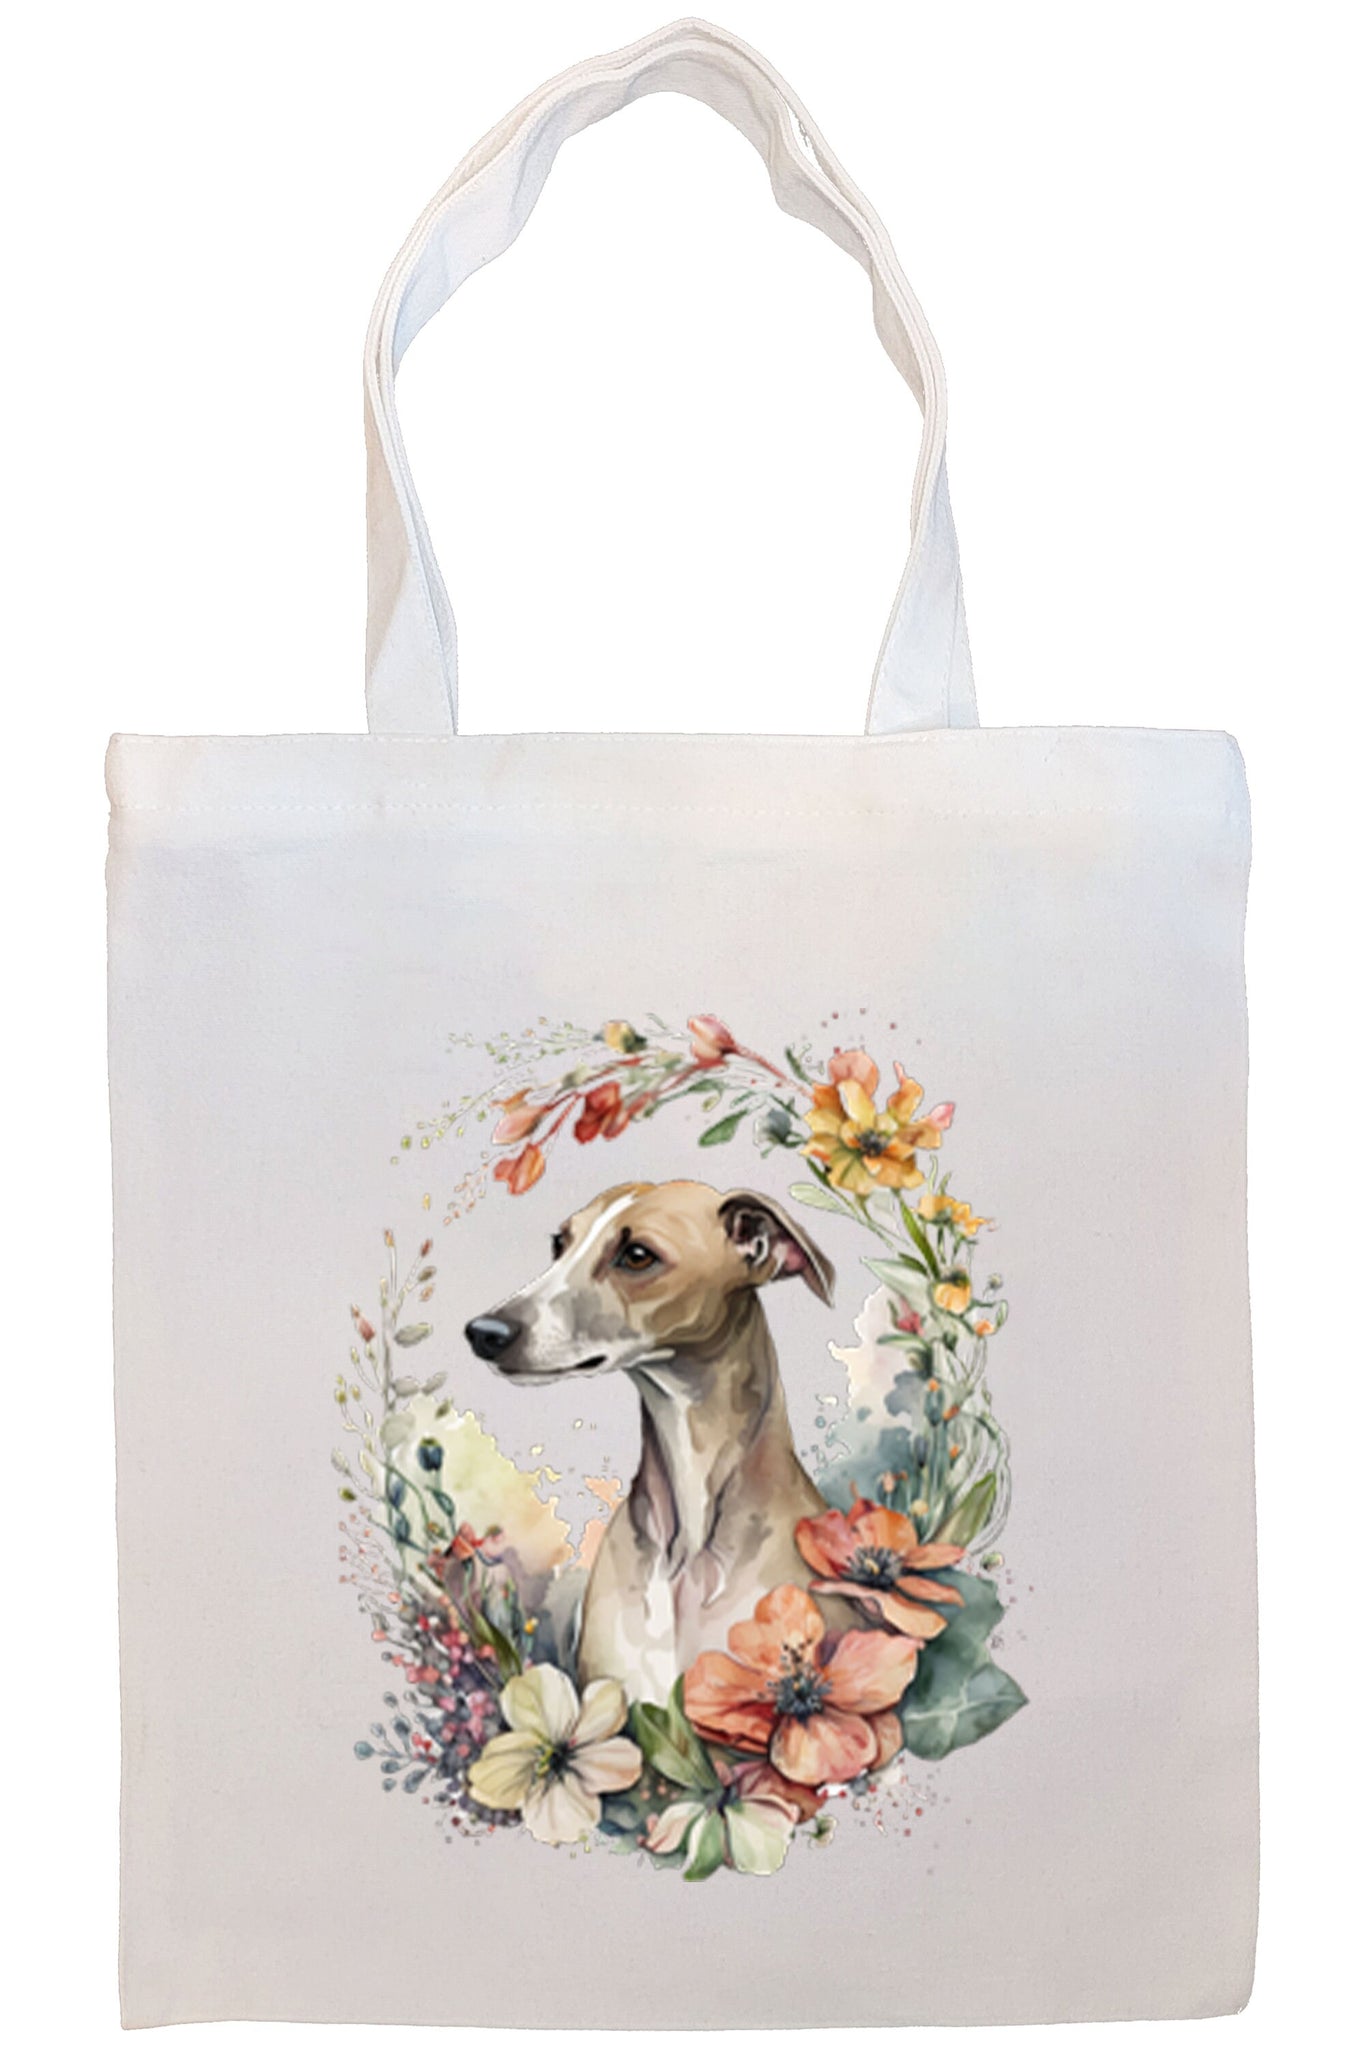 Canvas Tote Bag, Zippered With Handles & Inner Pocket, "Whippet"